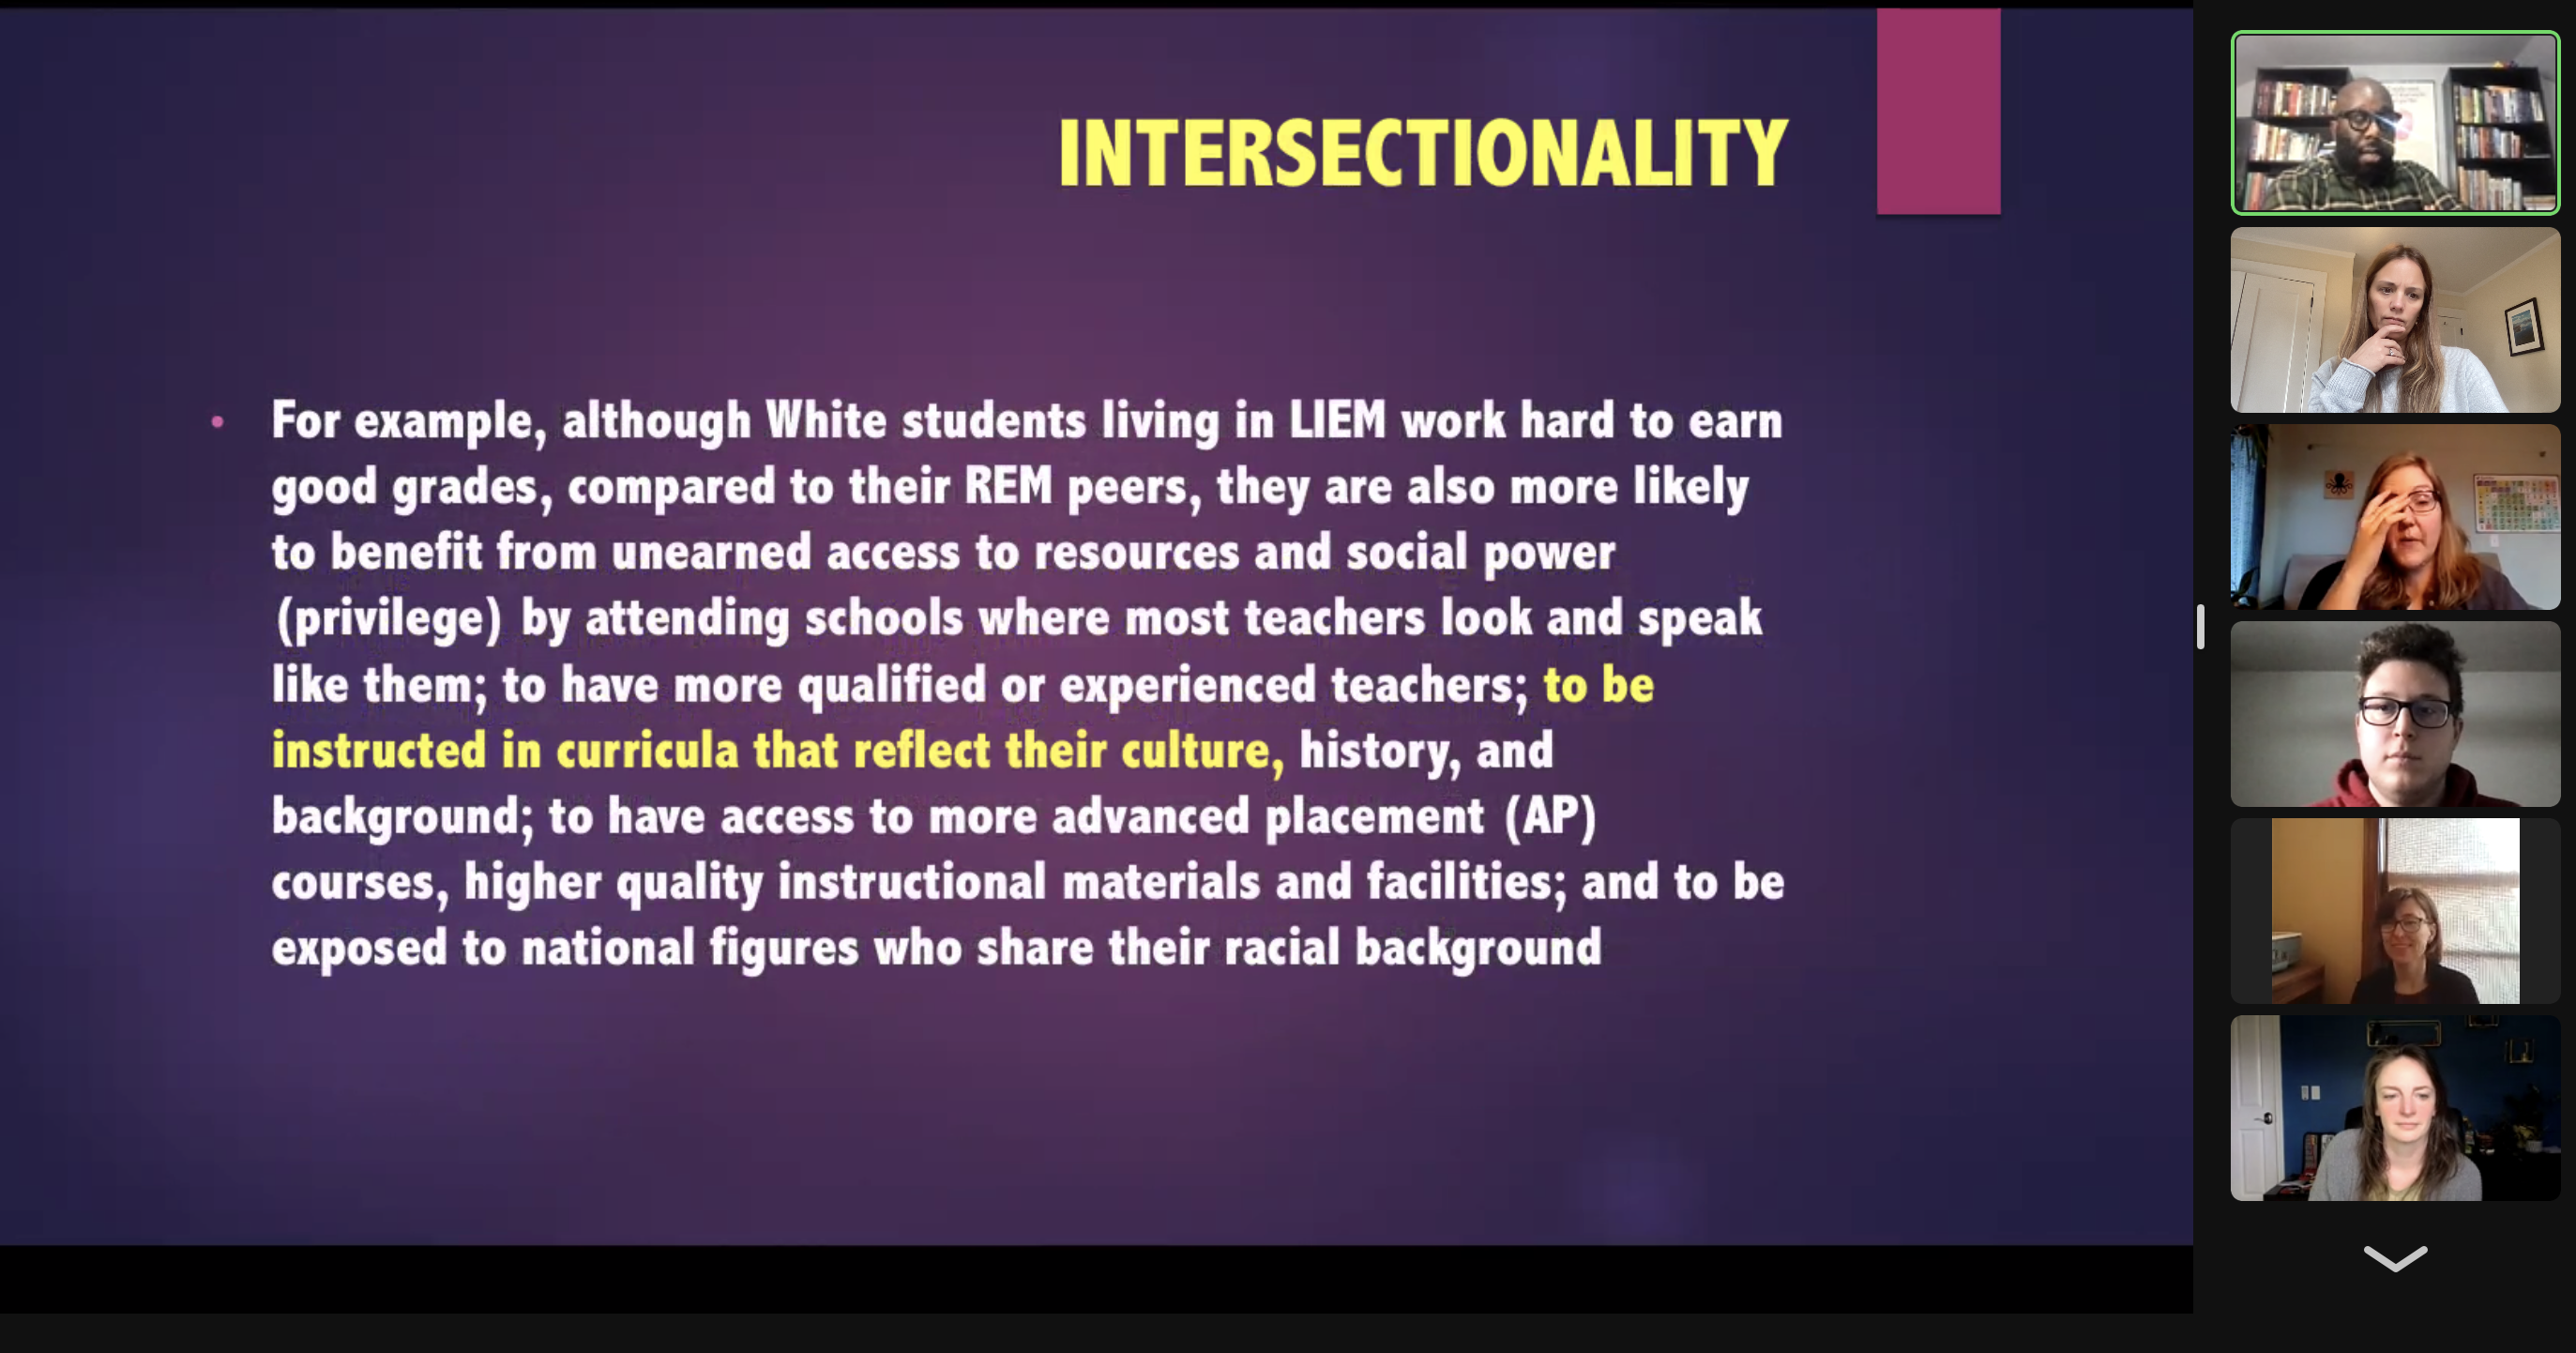 zoom screenshot, 5 participants' faces on the right side, and a presentation slide that says "intersectionality"